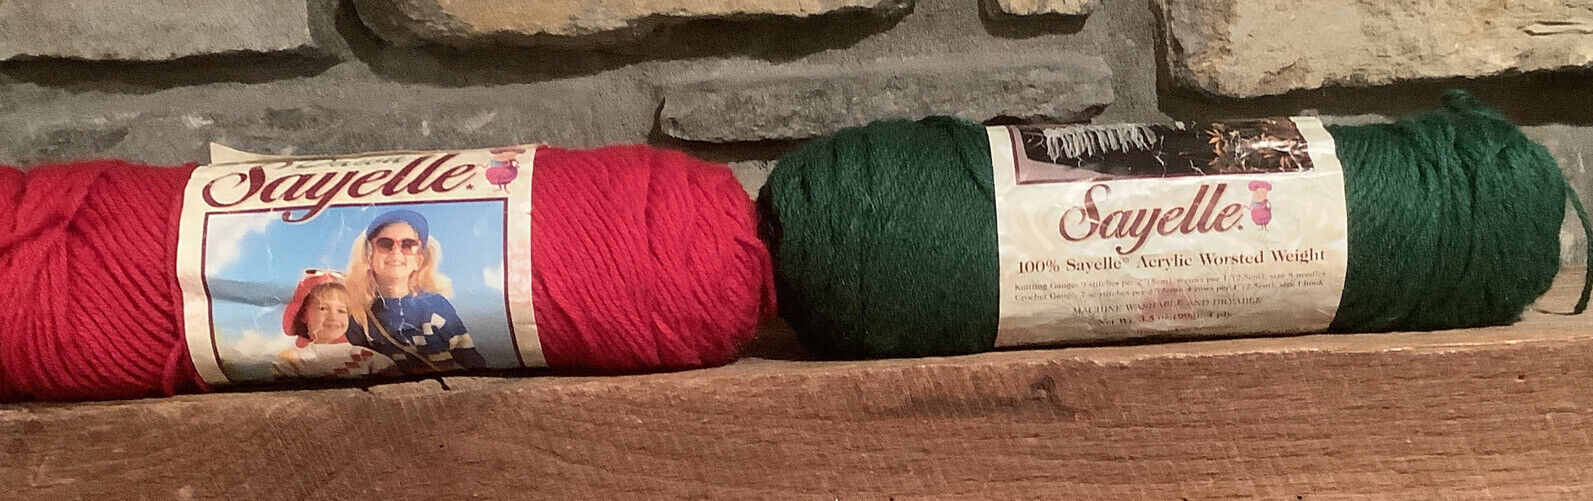 Vintage Sayelle Acrylic Worsted Weight 2 Scarlet 正規店仕入れの and Sage Dark Skeins 【オープニング